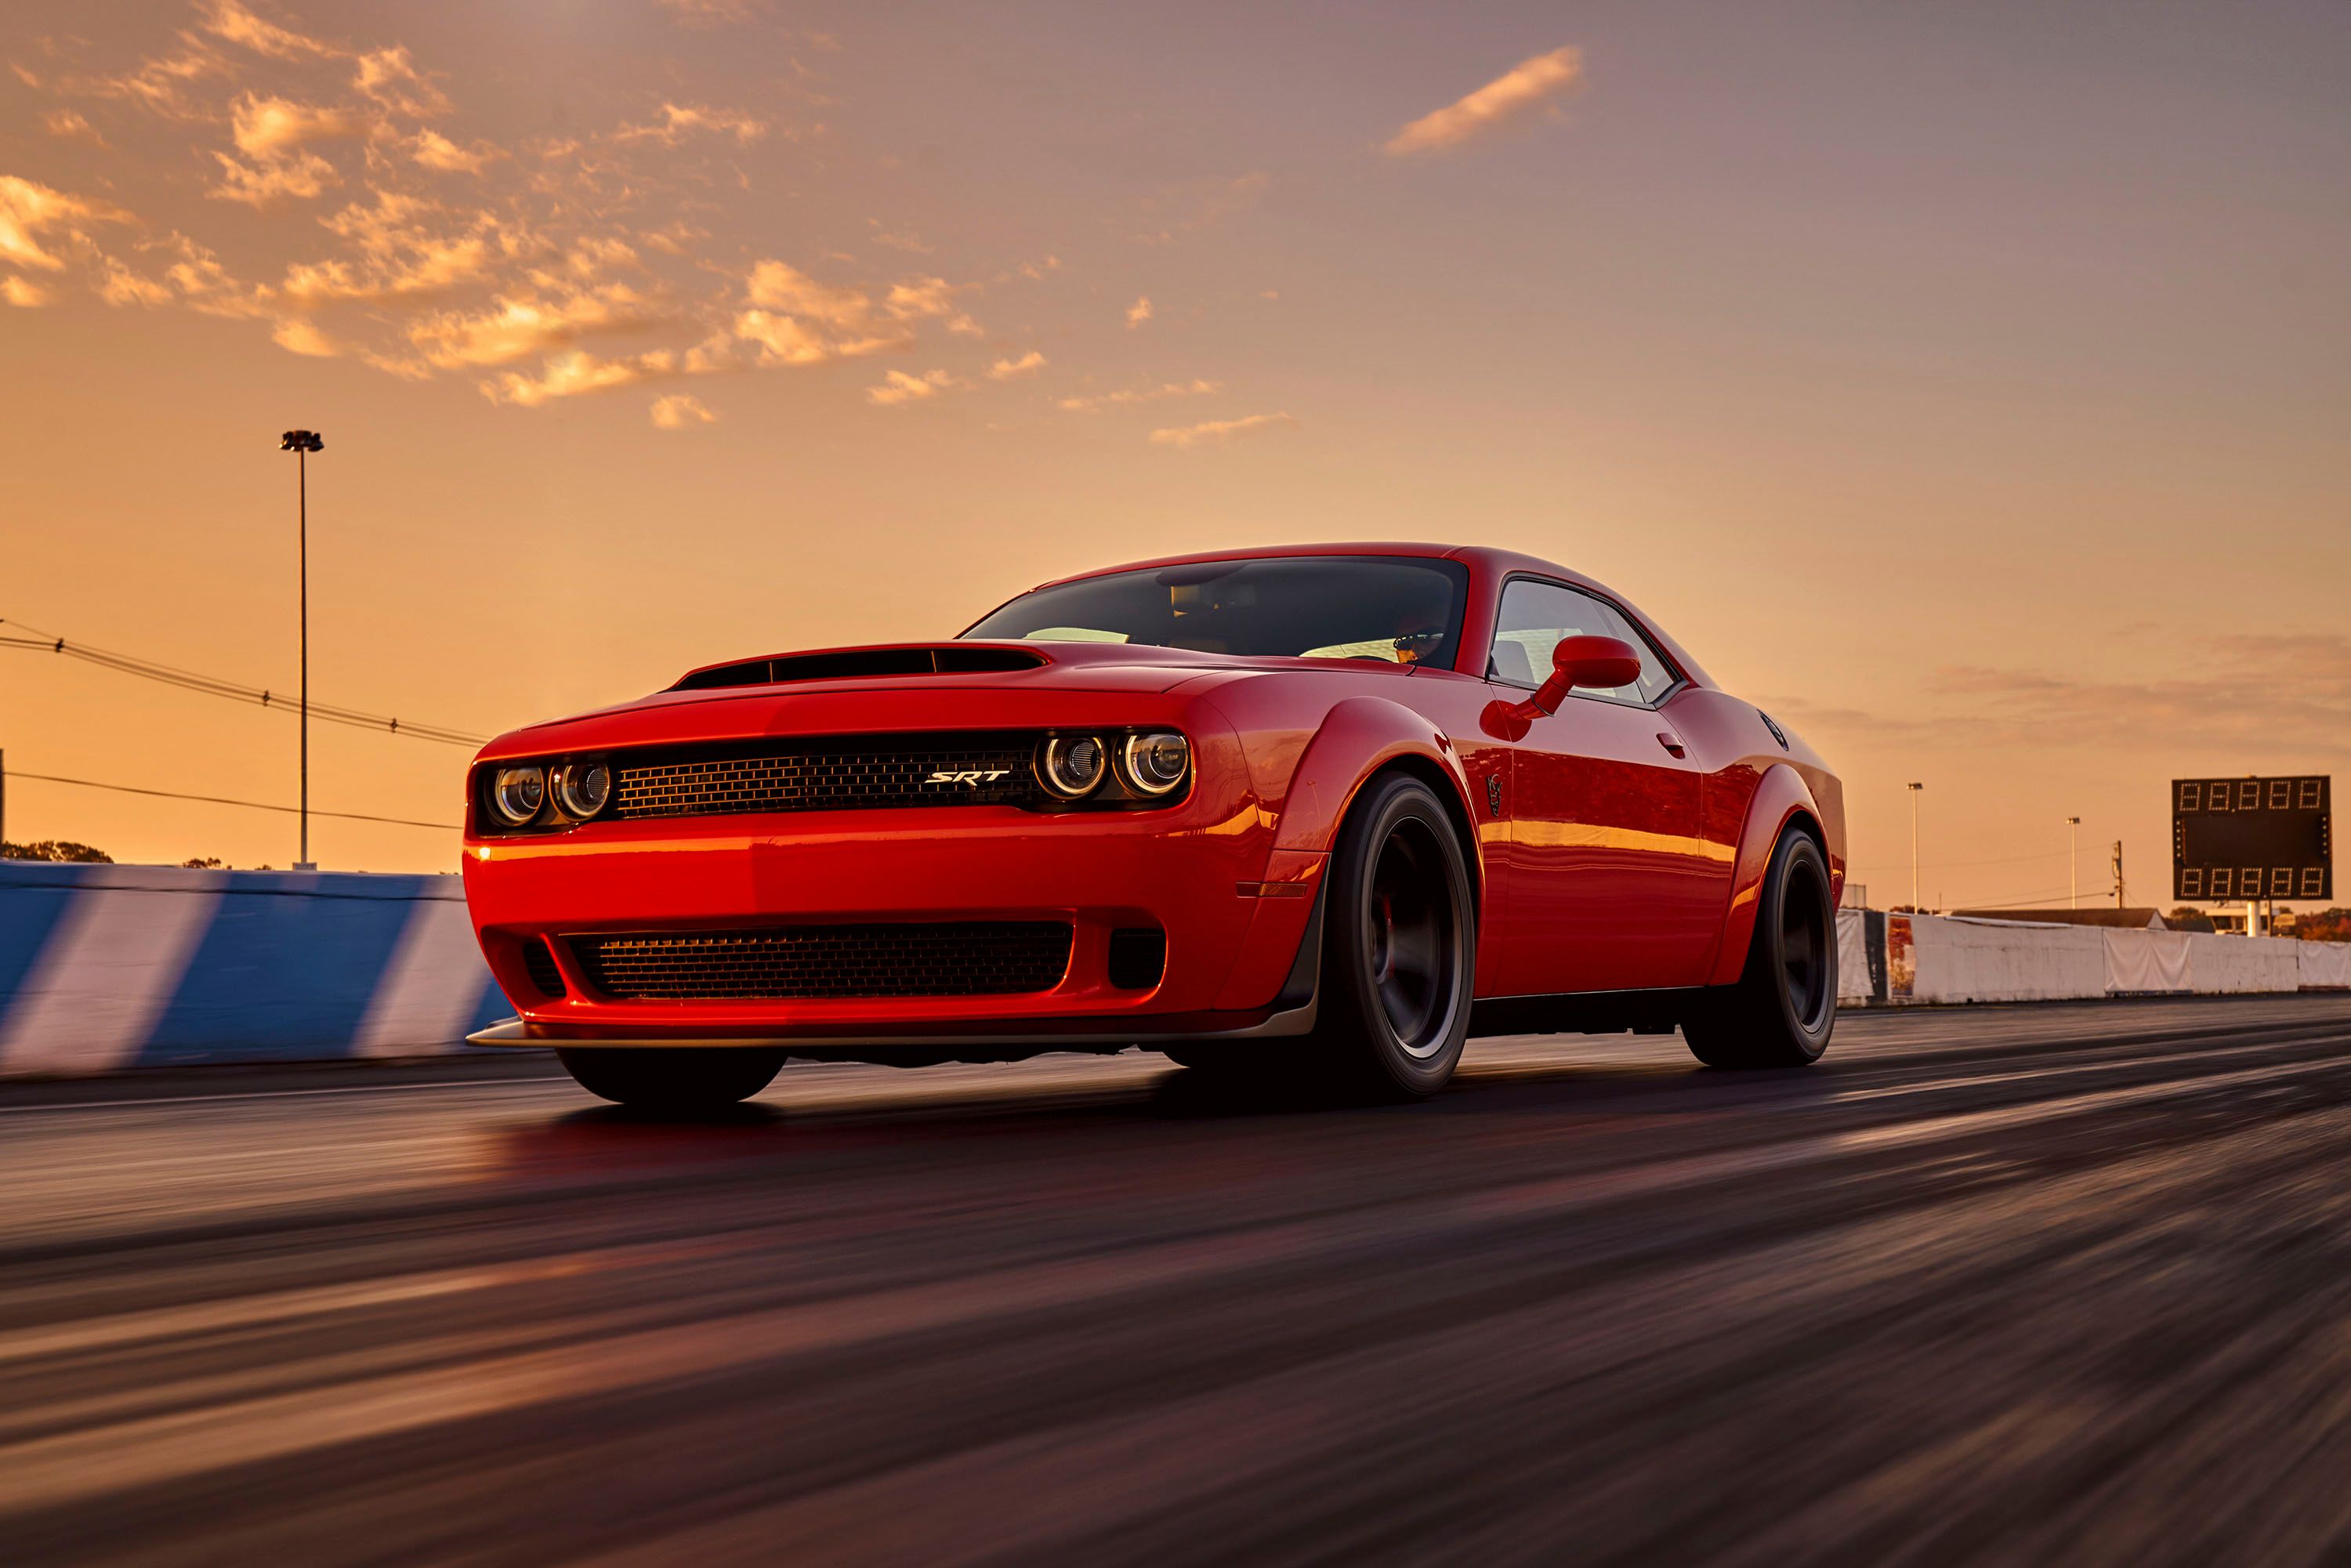 2019 Wish, Hope, and Complain All You Want - The Dodge Demon Is Dead and Isn't Coming Back